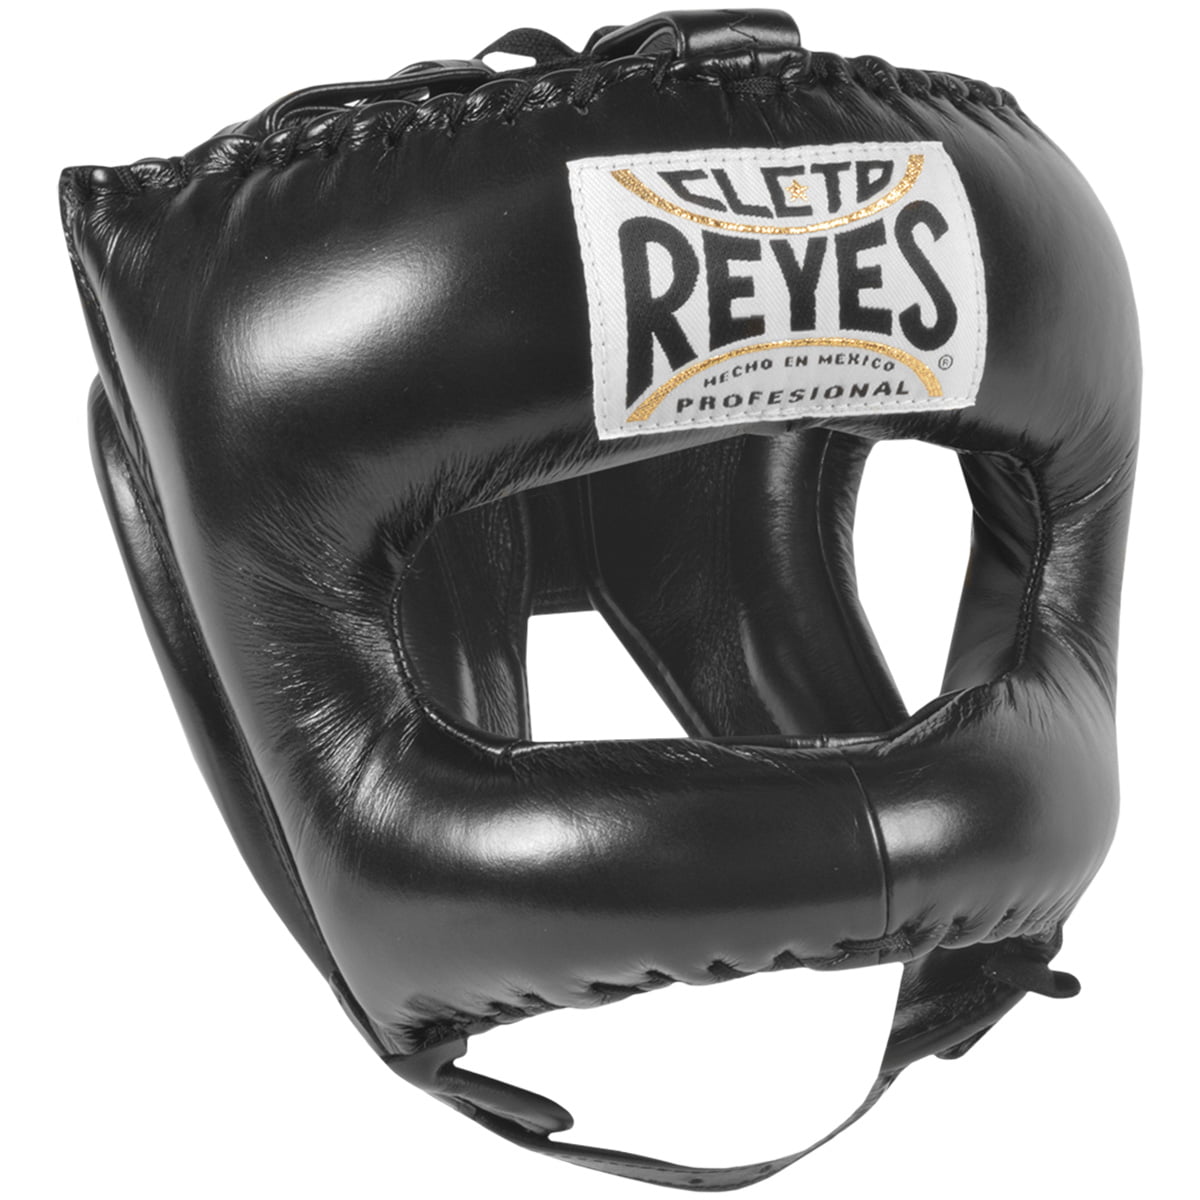 Titanium Cleto Reyes Redesigned Leather Boxing Headgear with Nylon Face Bar 